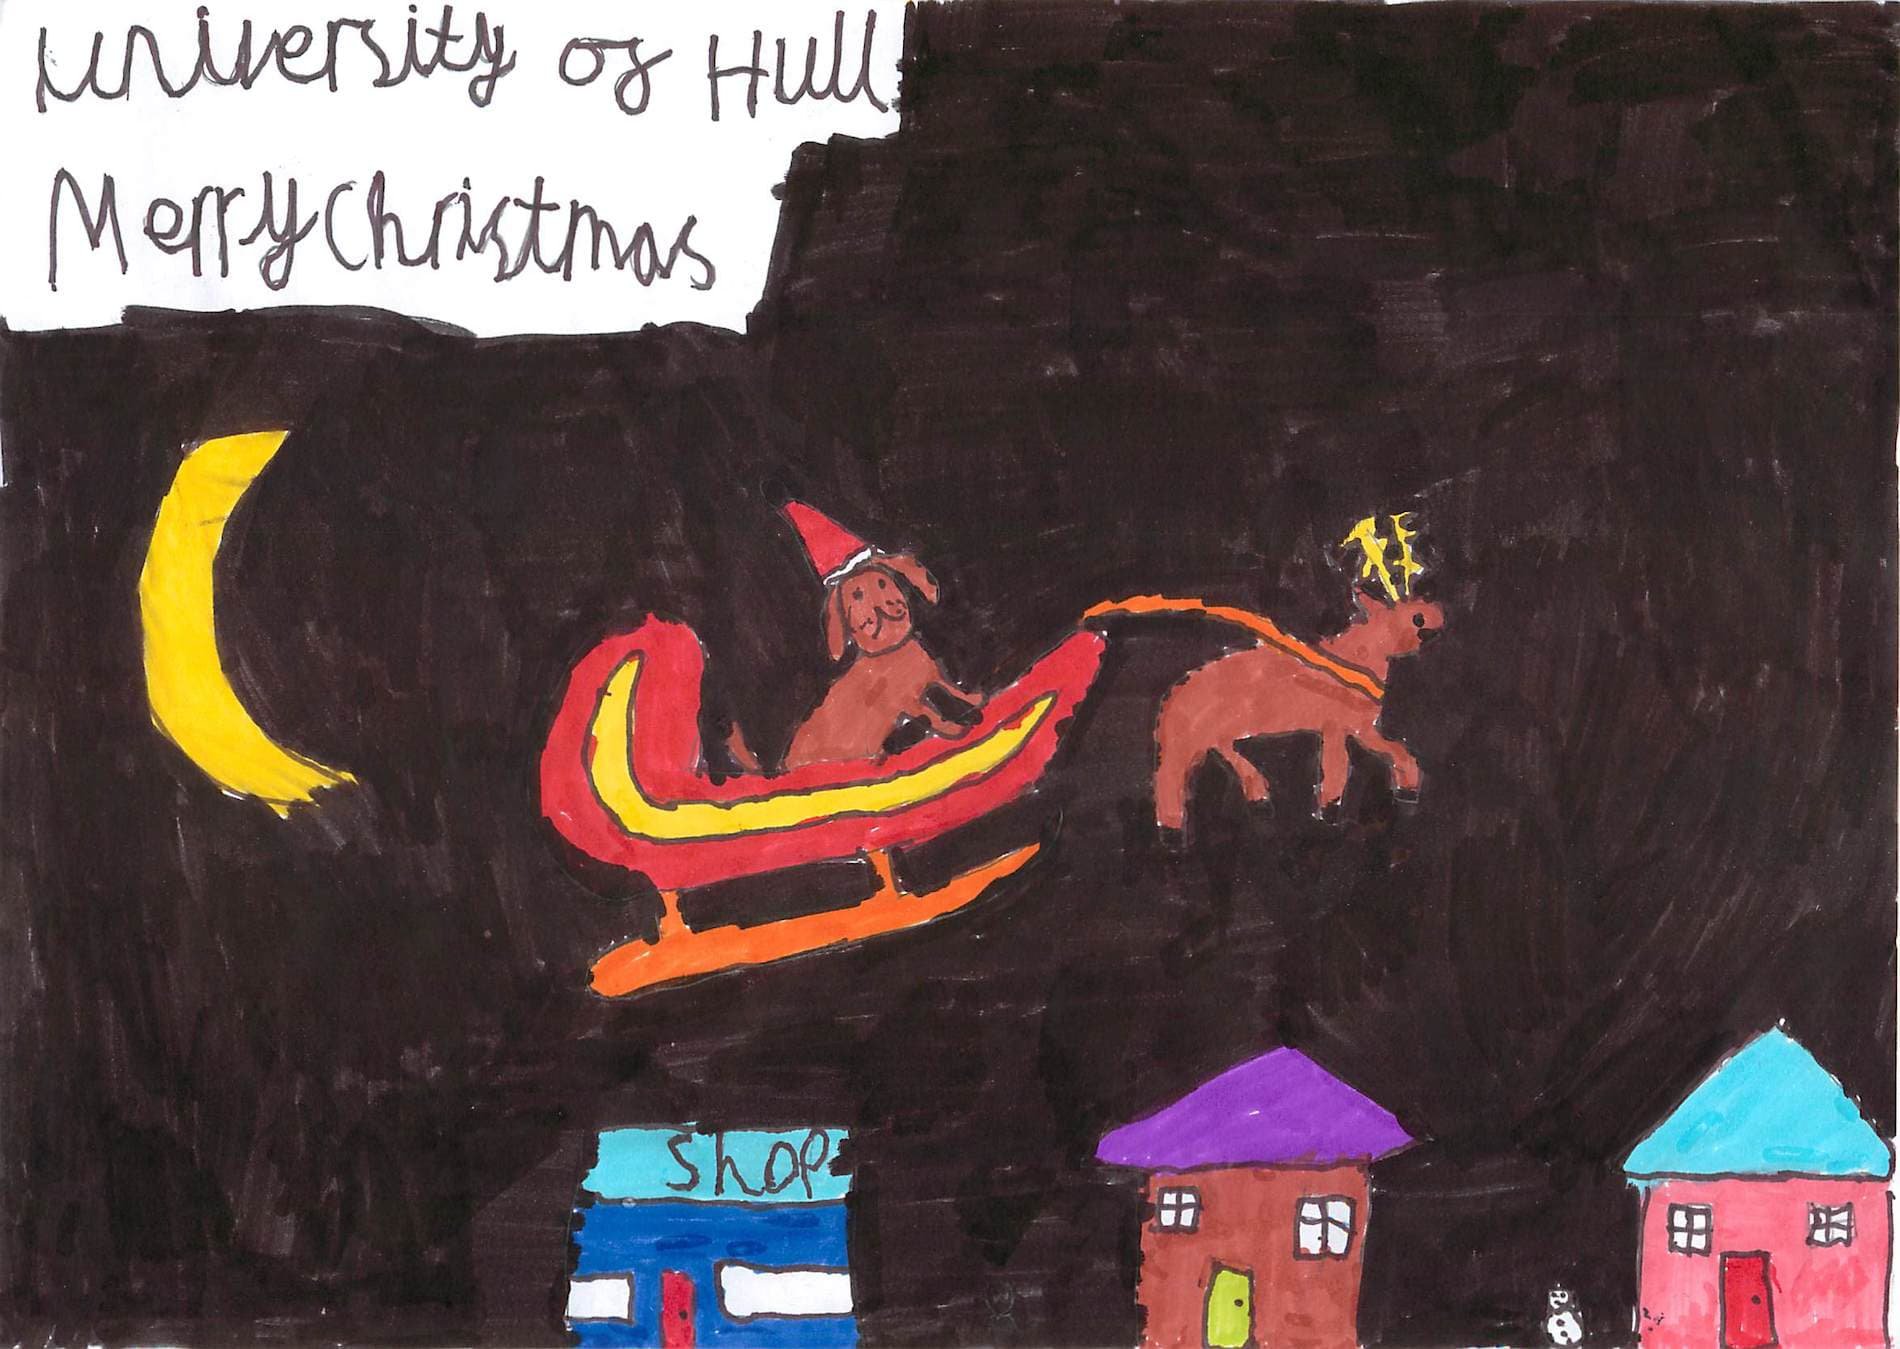 Vice-Chancellor’s Christmas card competition winner 2021